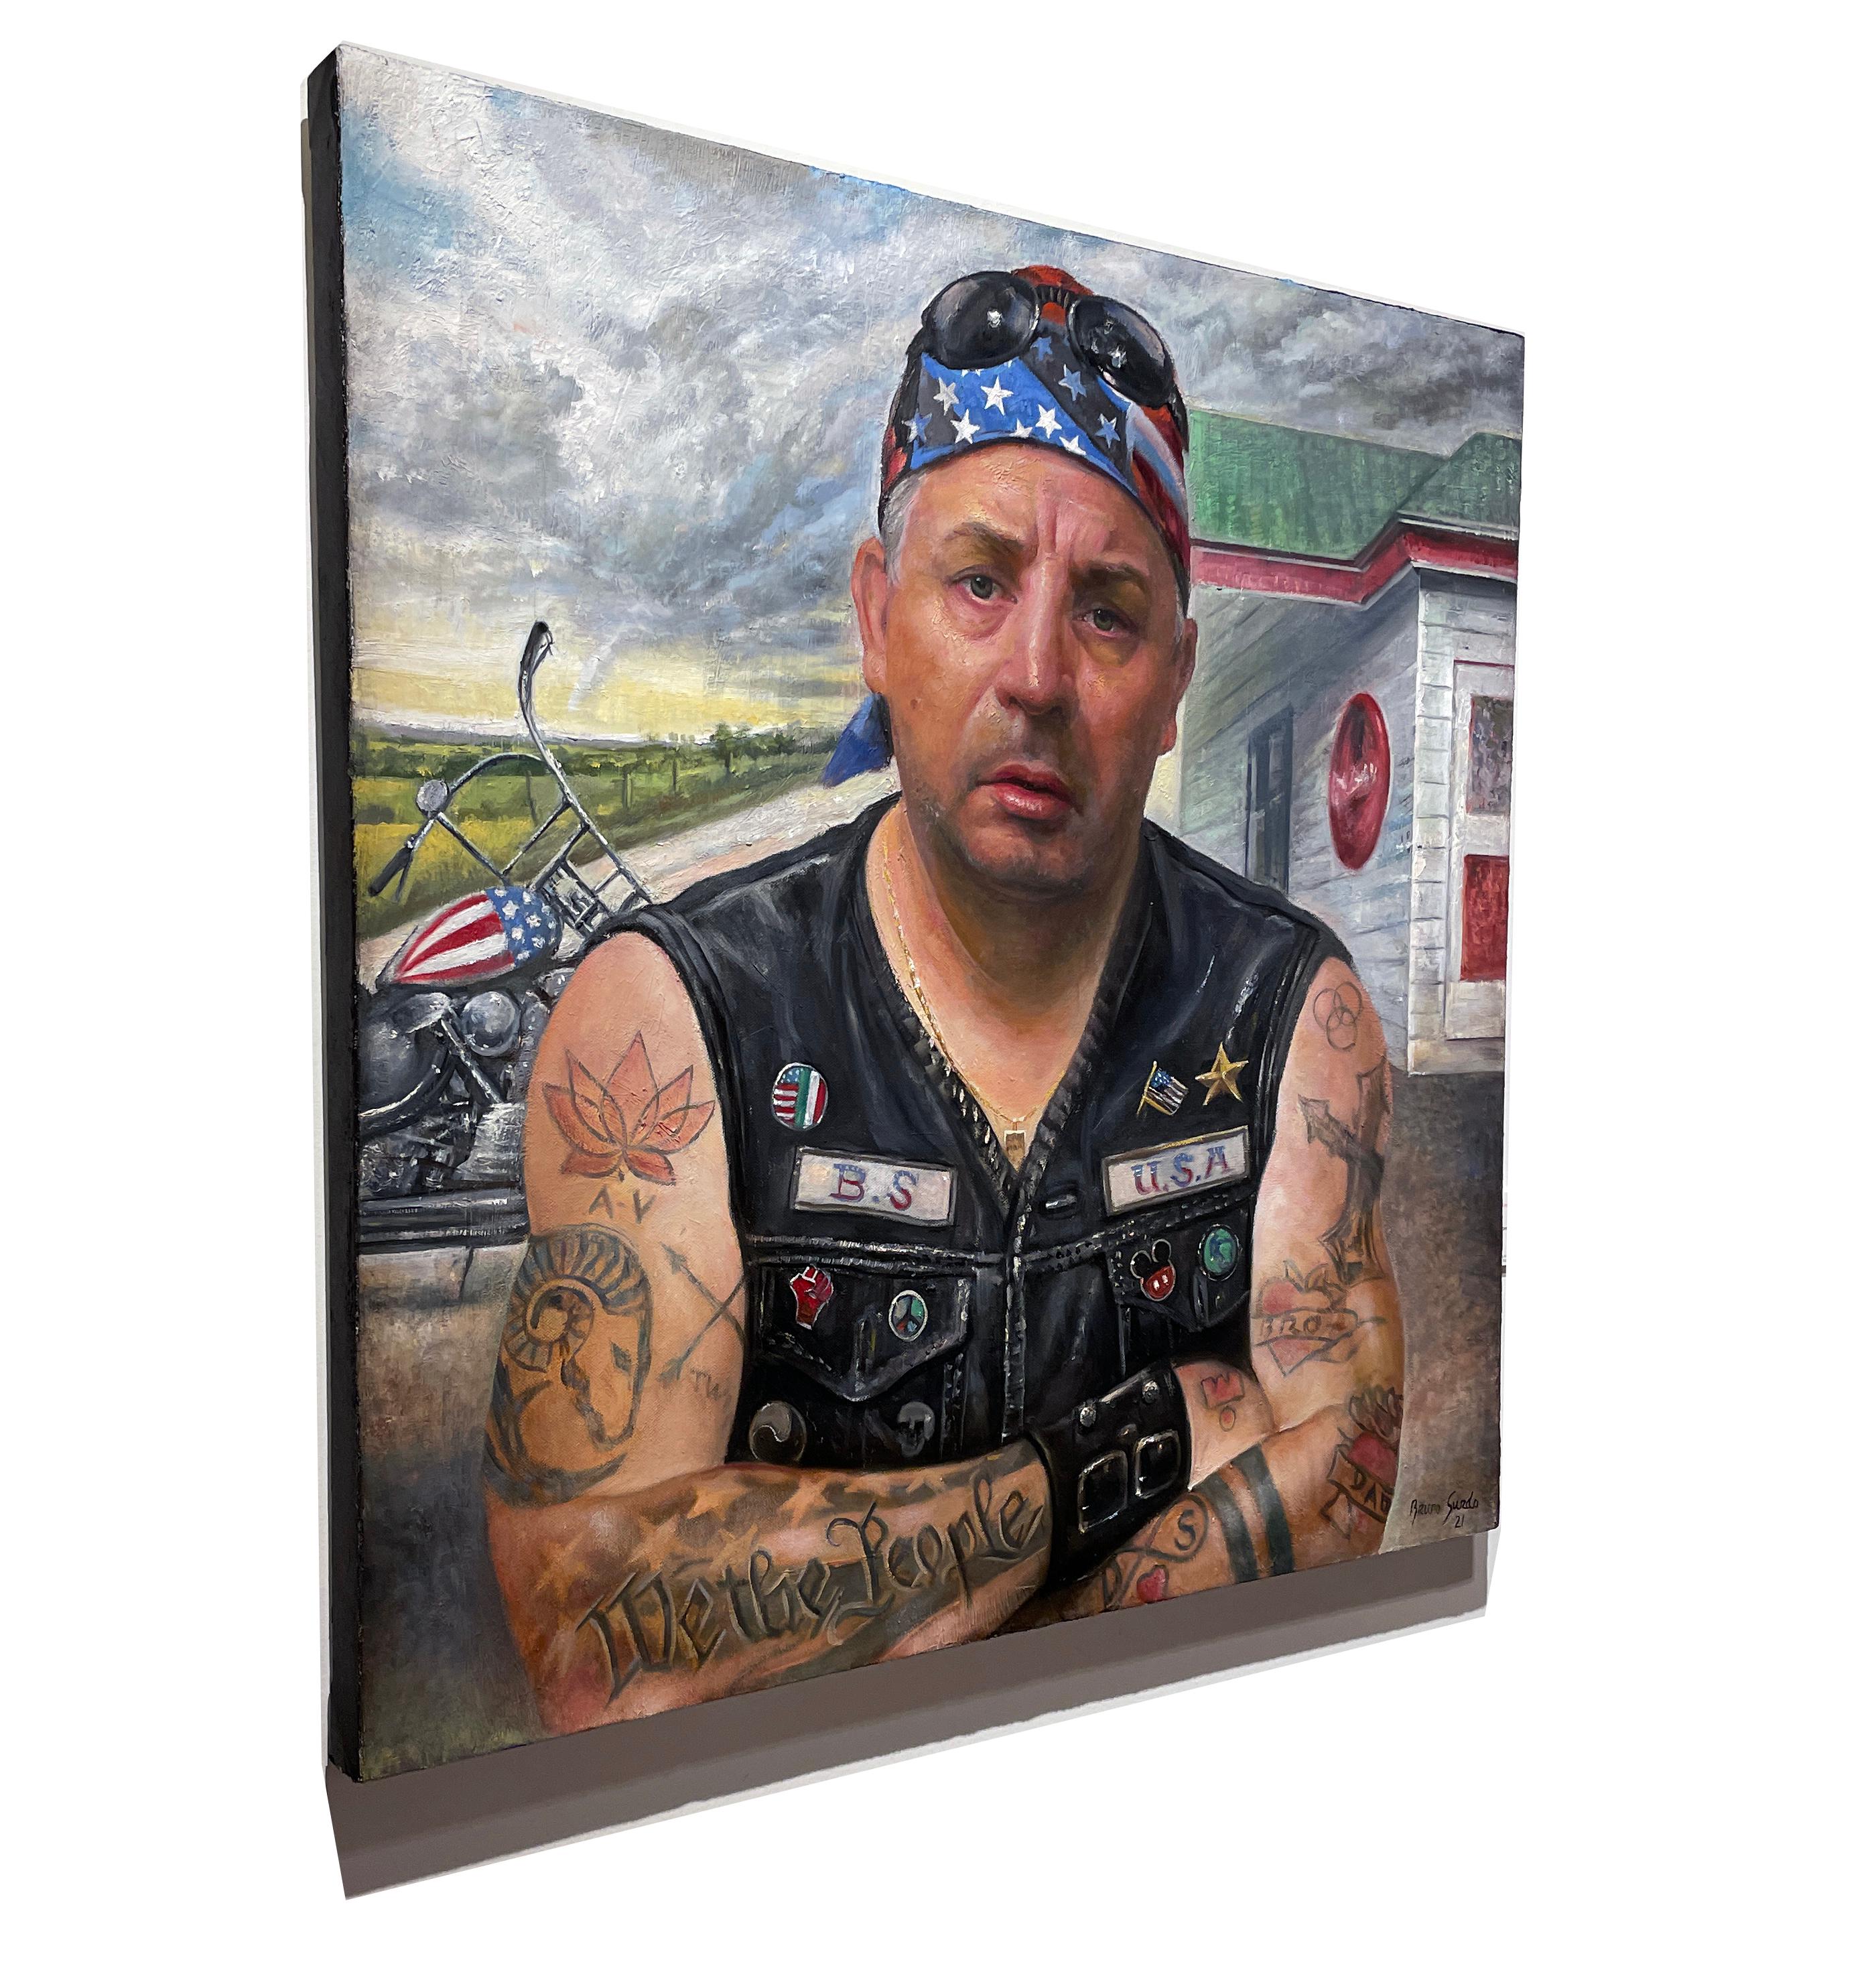 Is A Storm Coming? - Portrait of a Tattooed Biker, Original Oil on Canvas - Brown Portrait Painting by Bruno Surdo